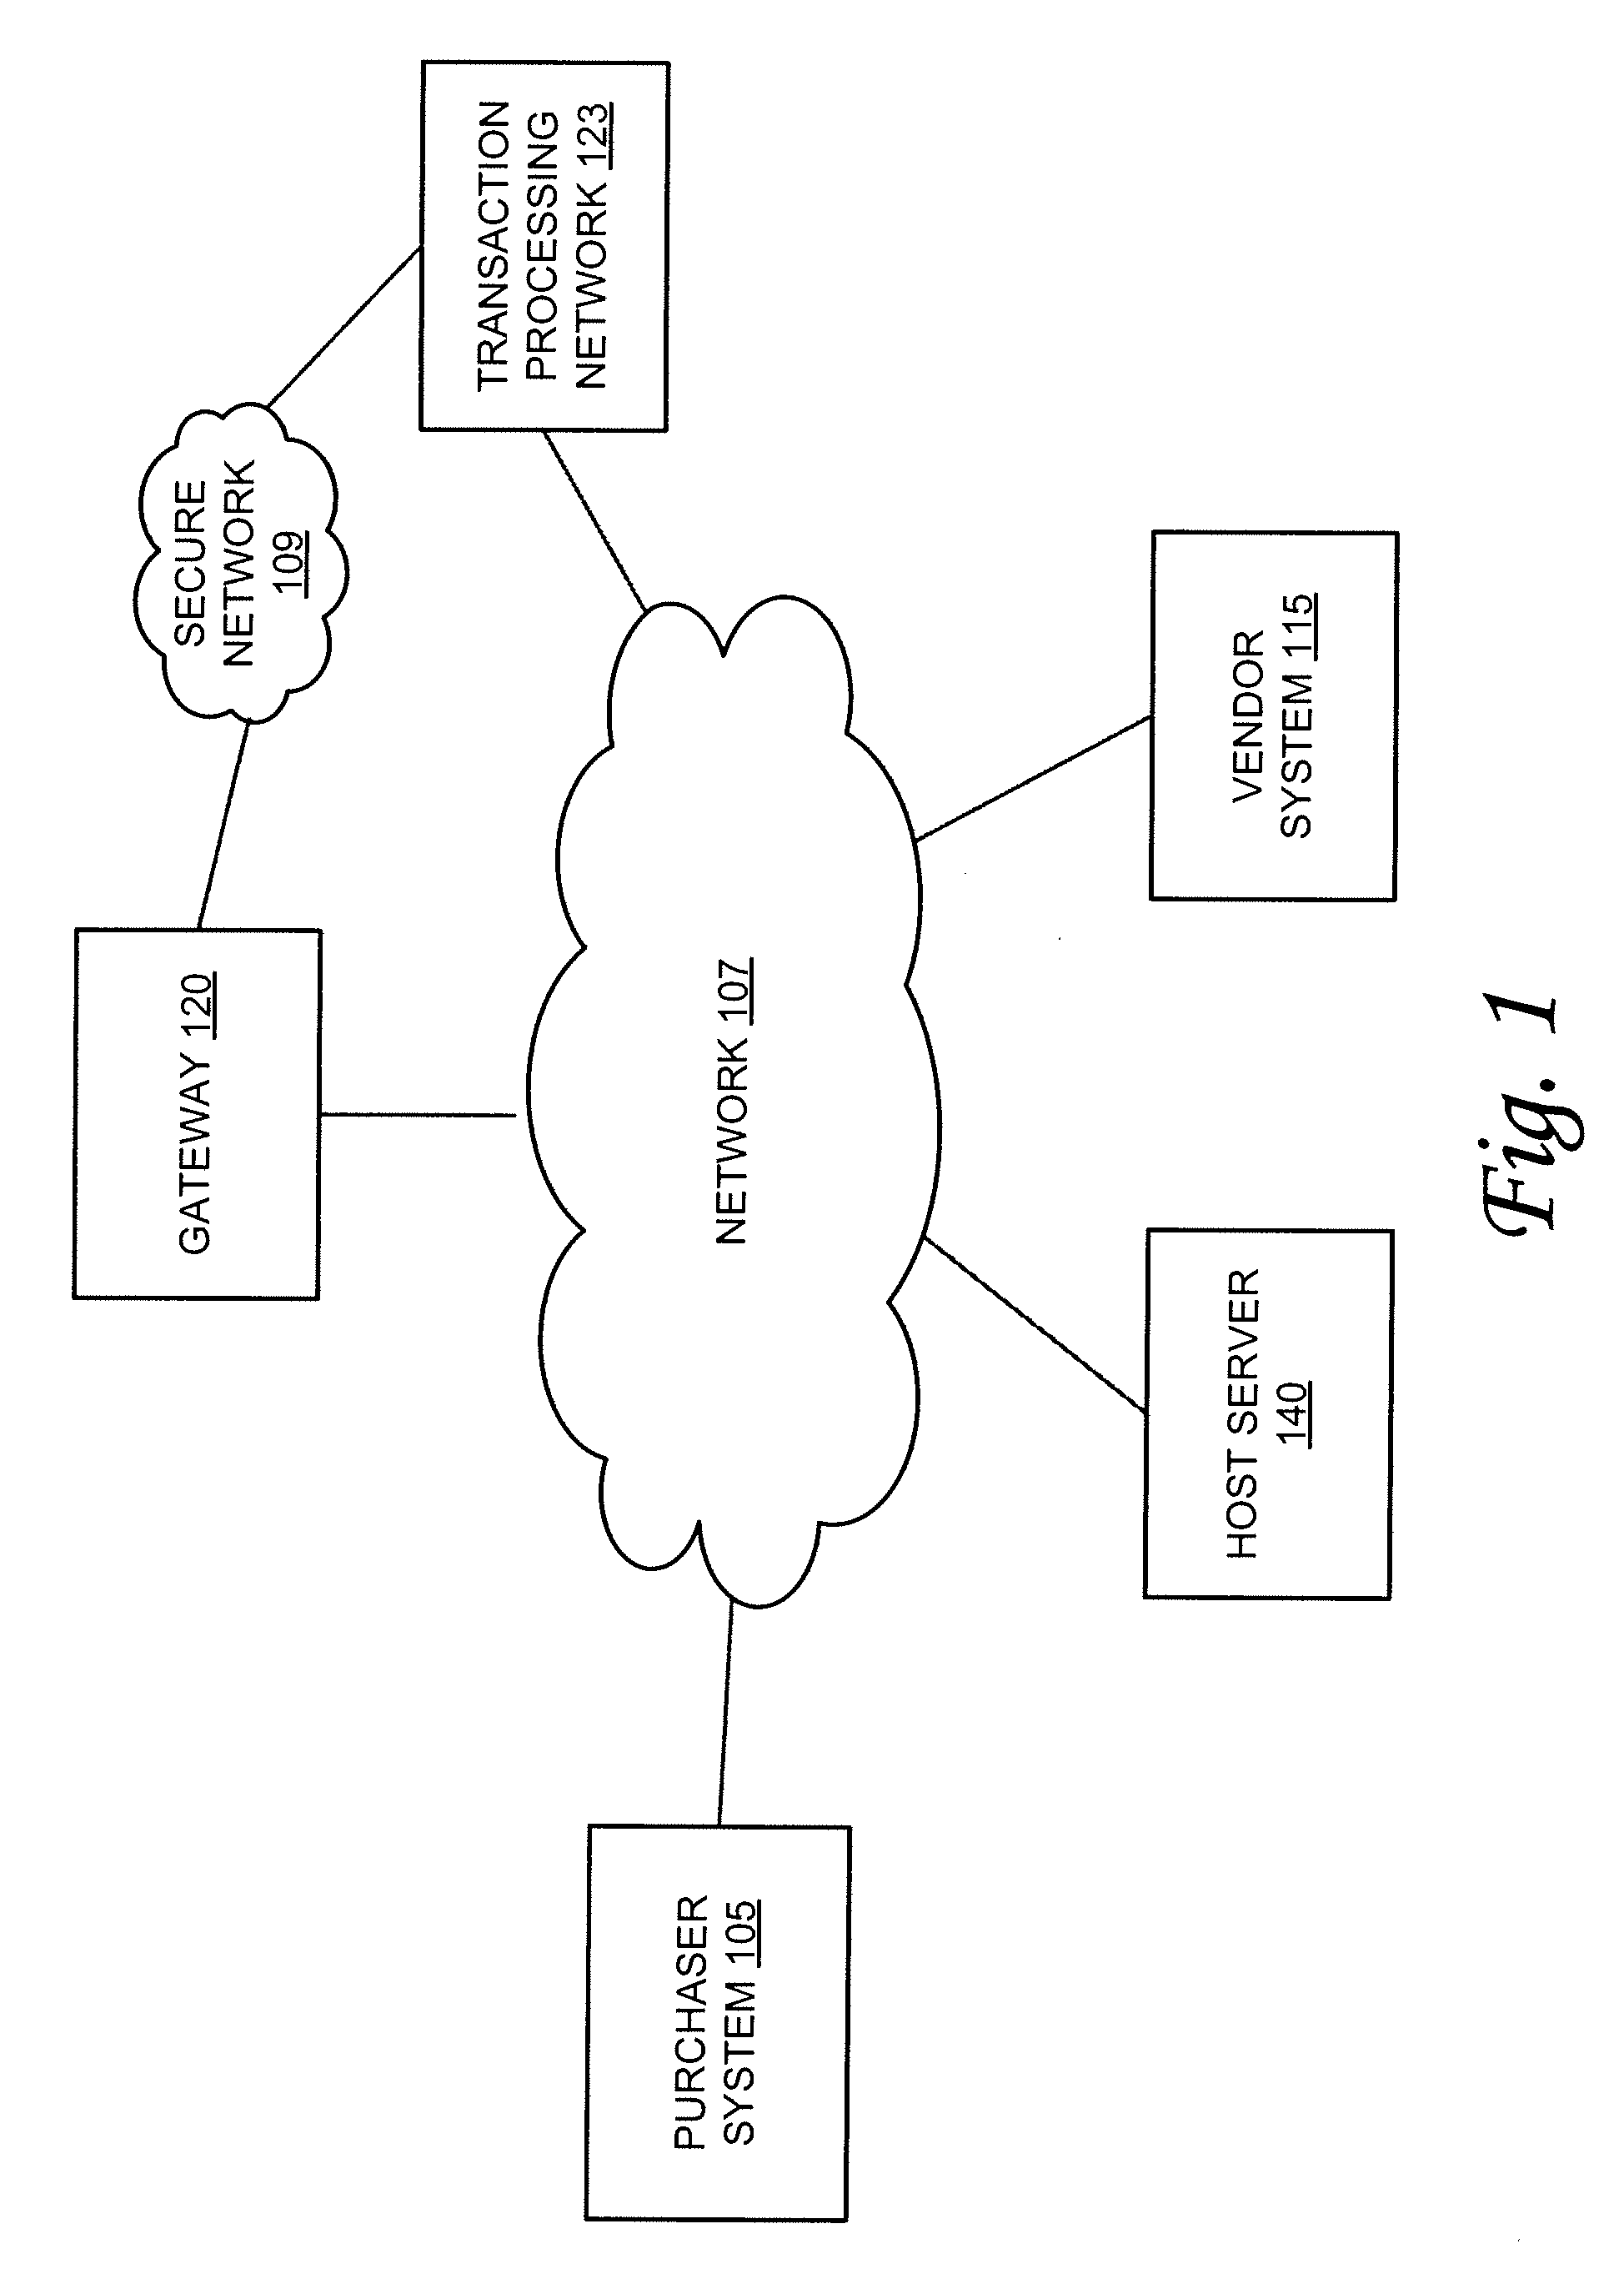 Personal token read system and method